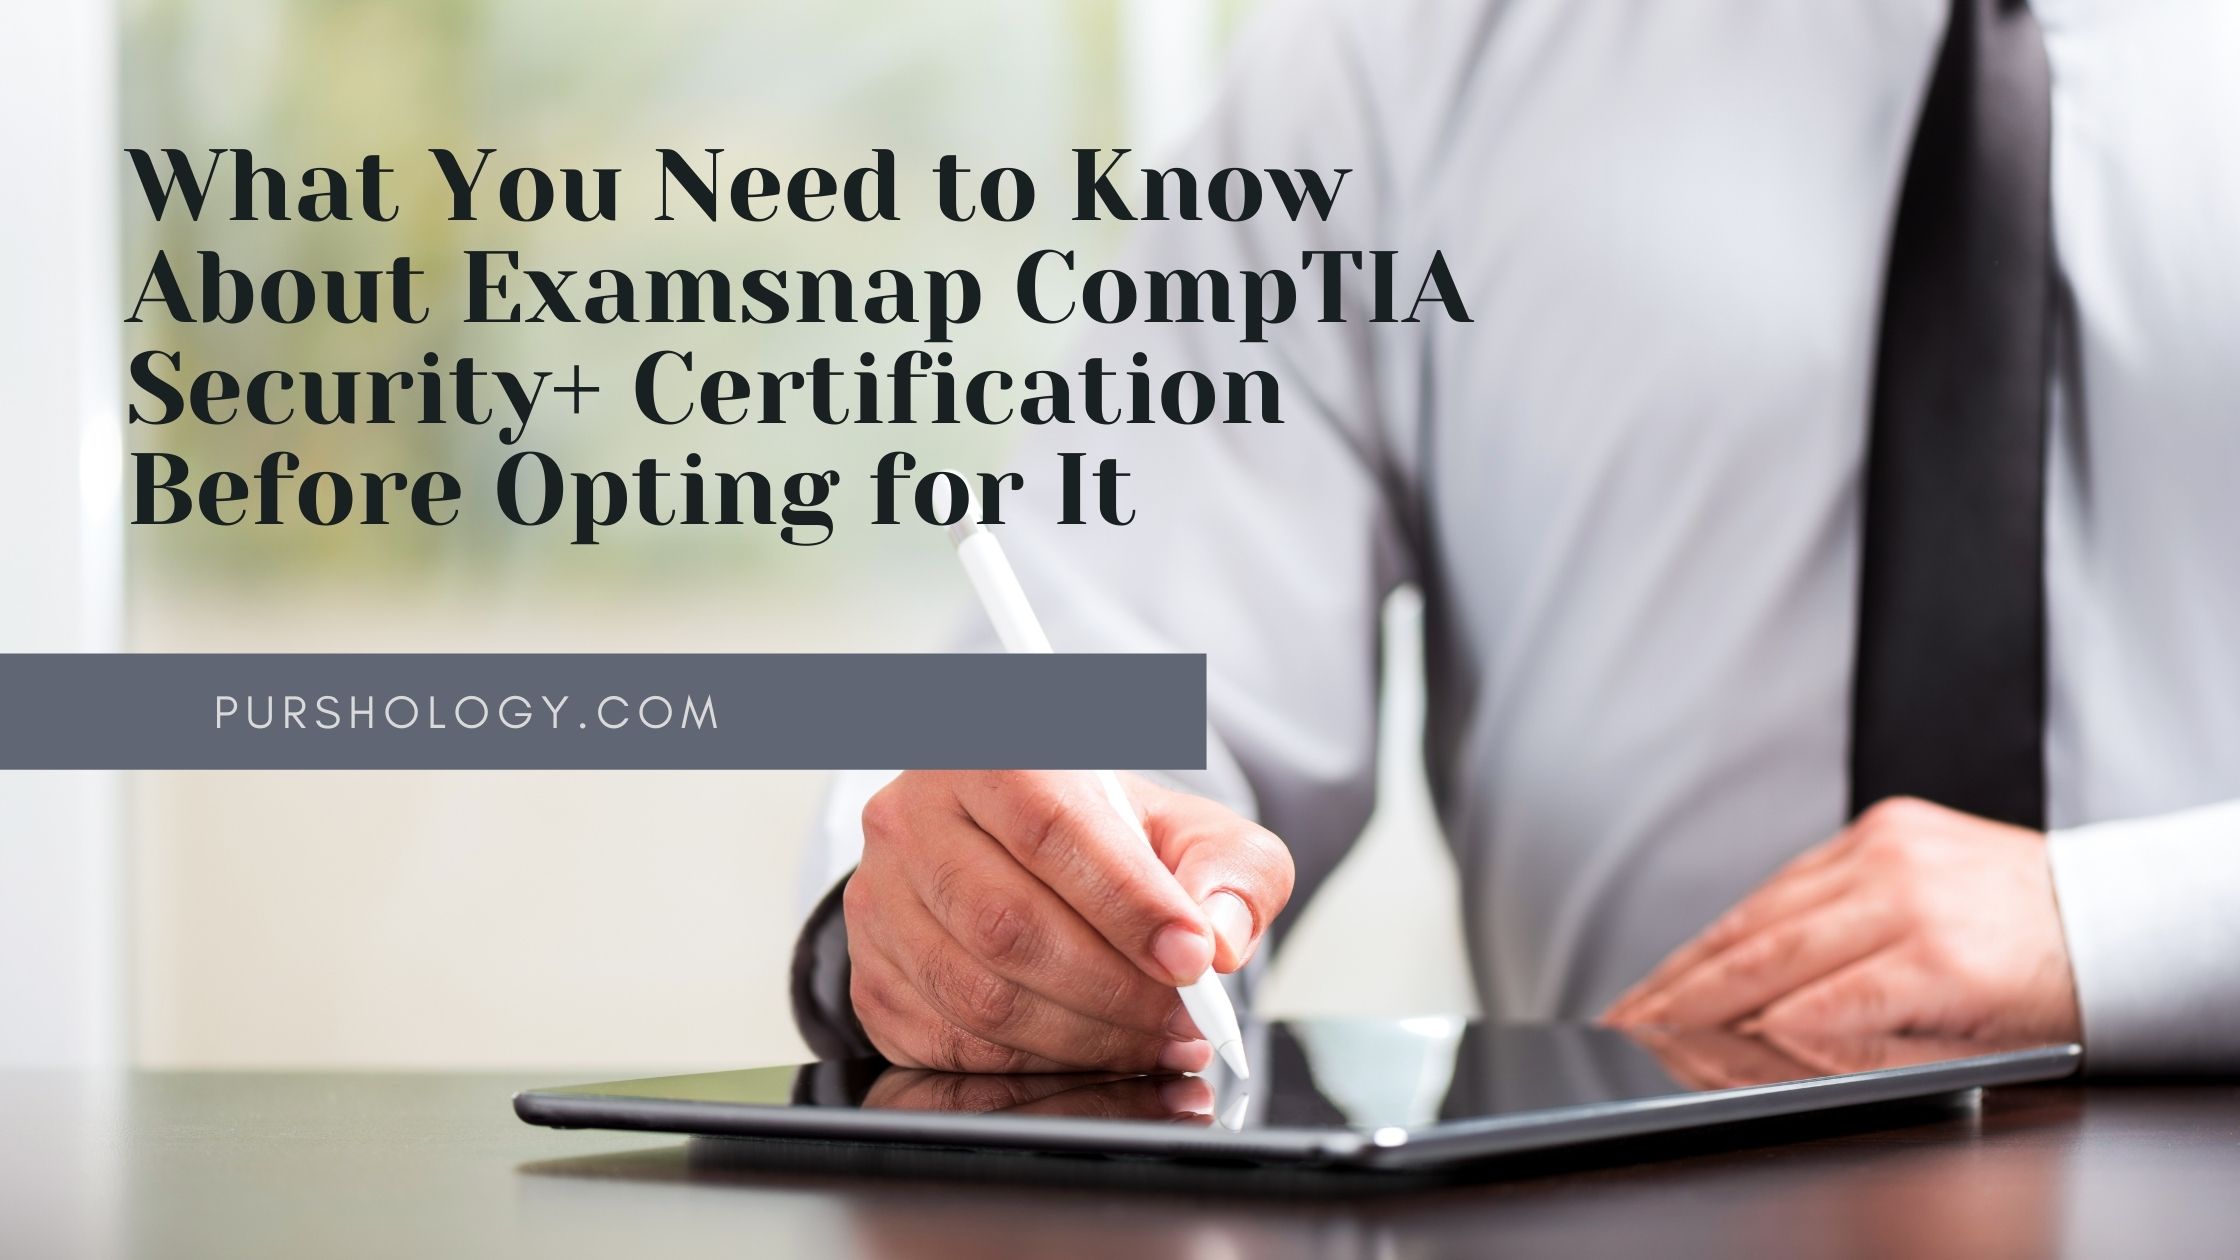 What You Need to Know About Examsnap CompTIA Security+ Certification Before Opting for It